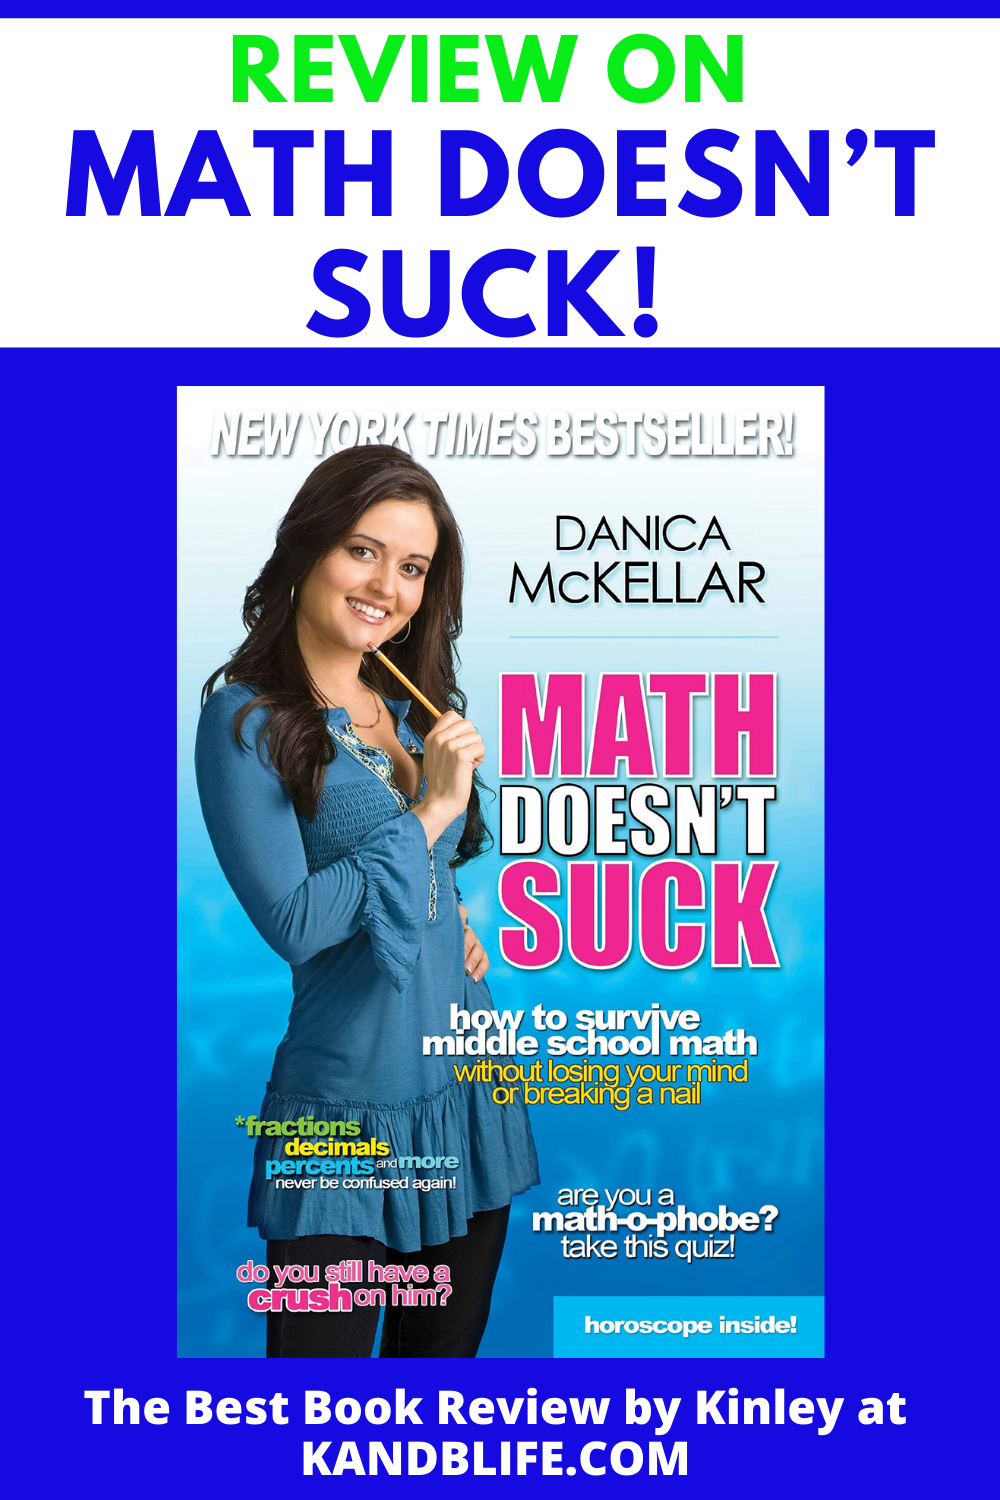 A blue and lime green book cover for a Review on Math Doesn't Suck